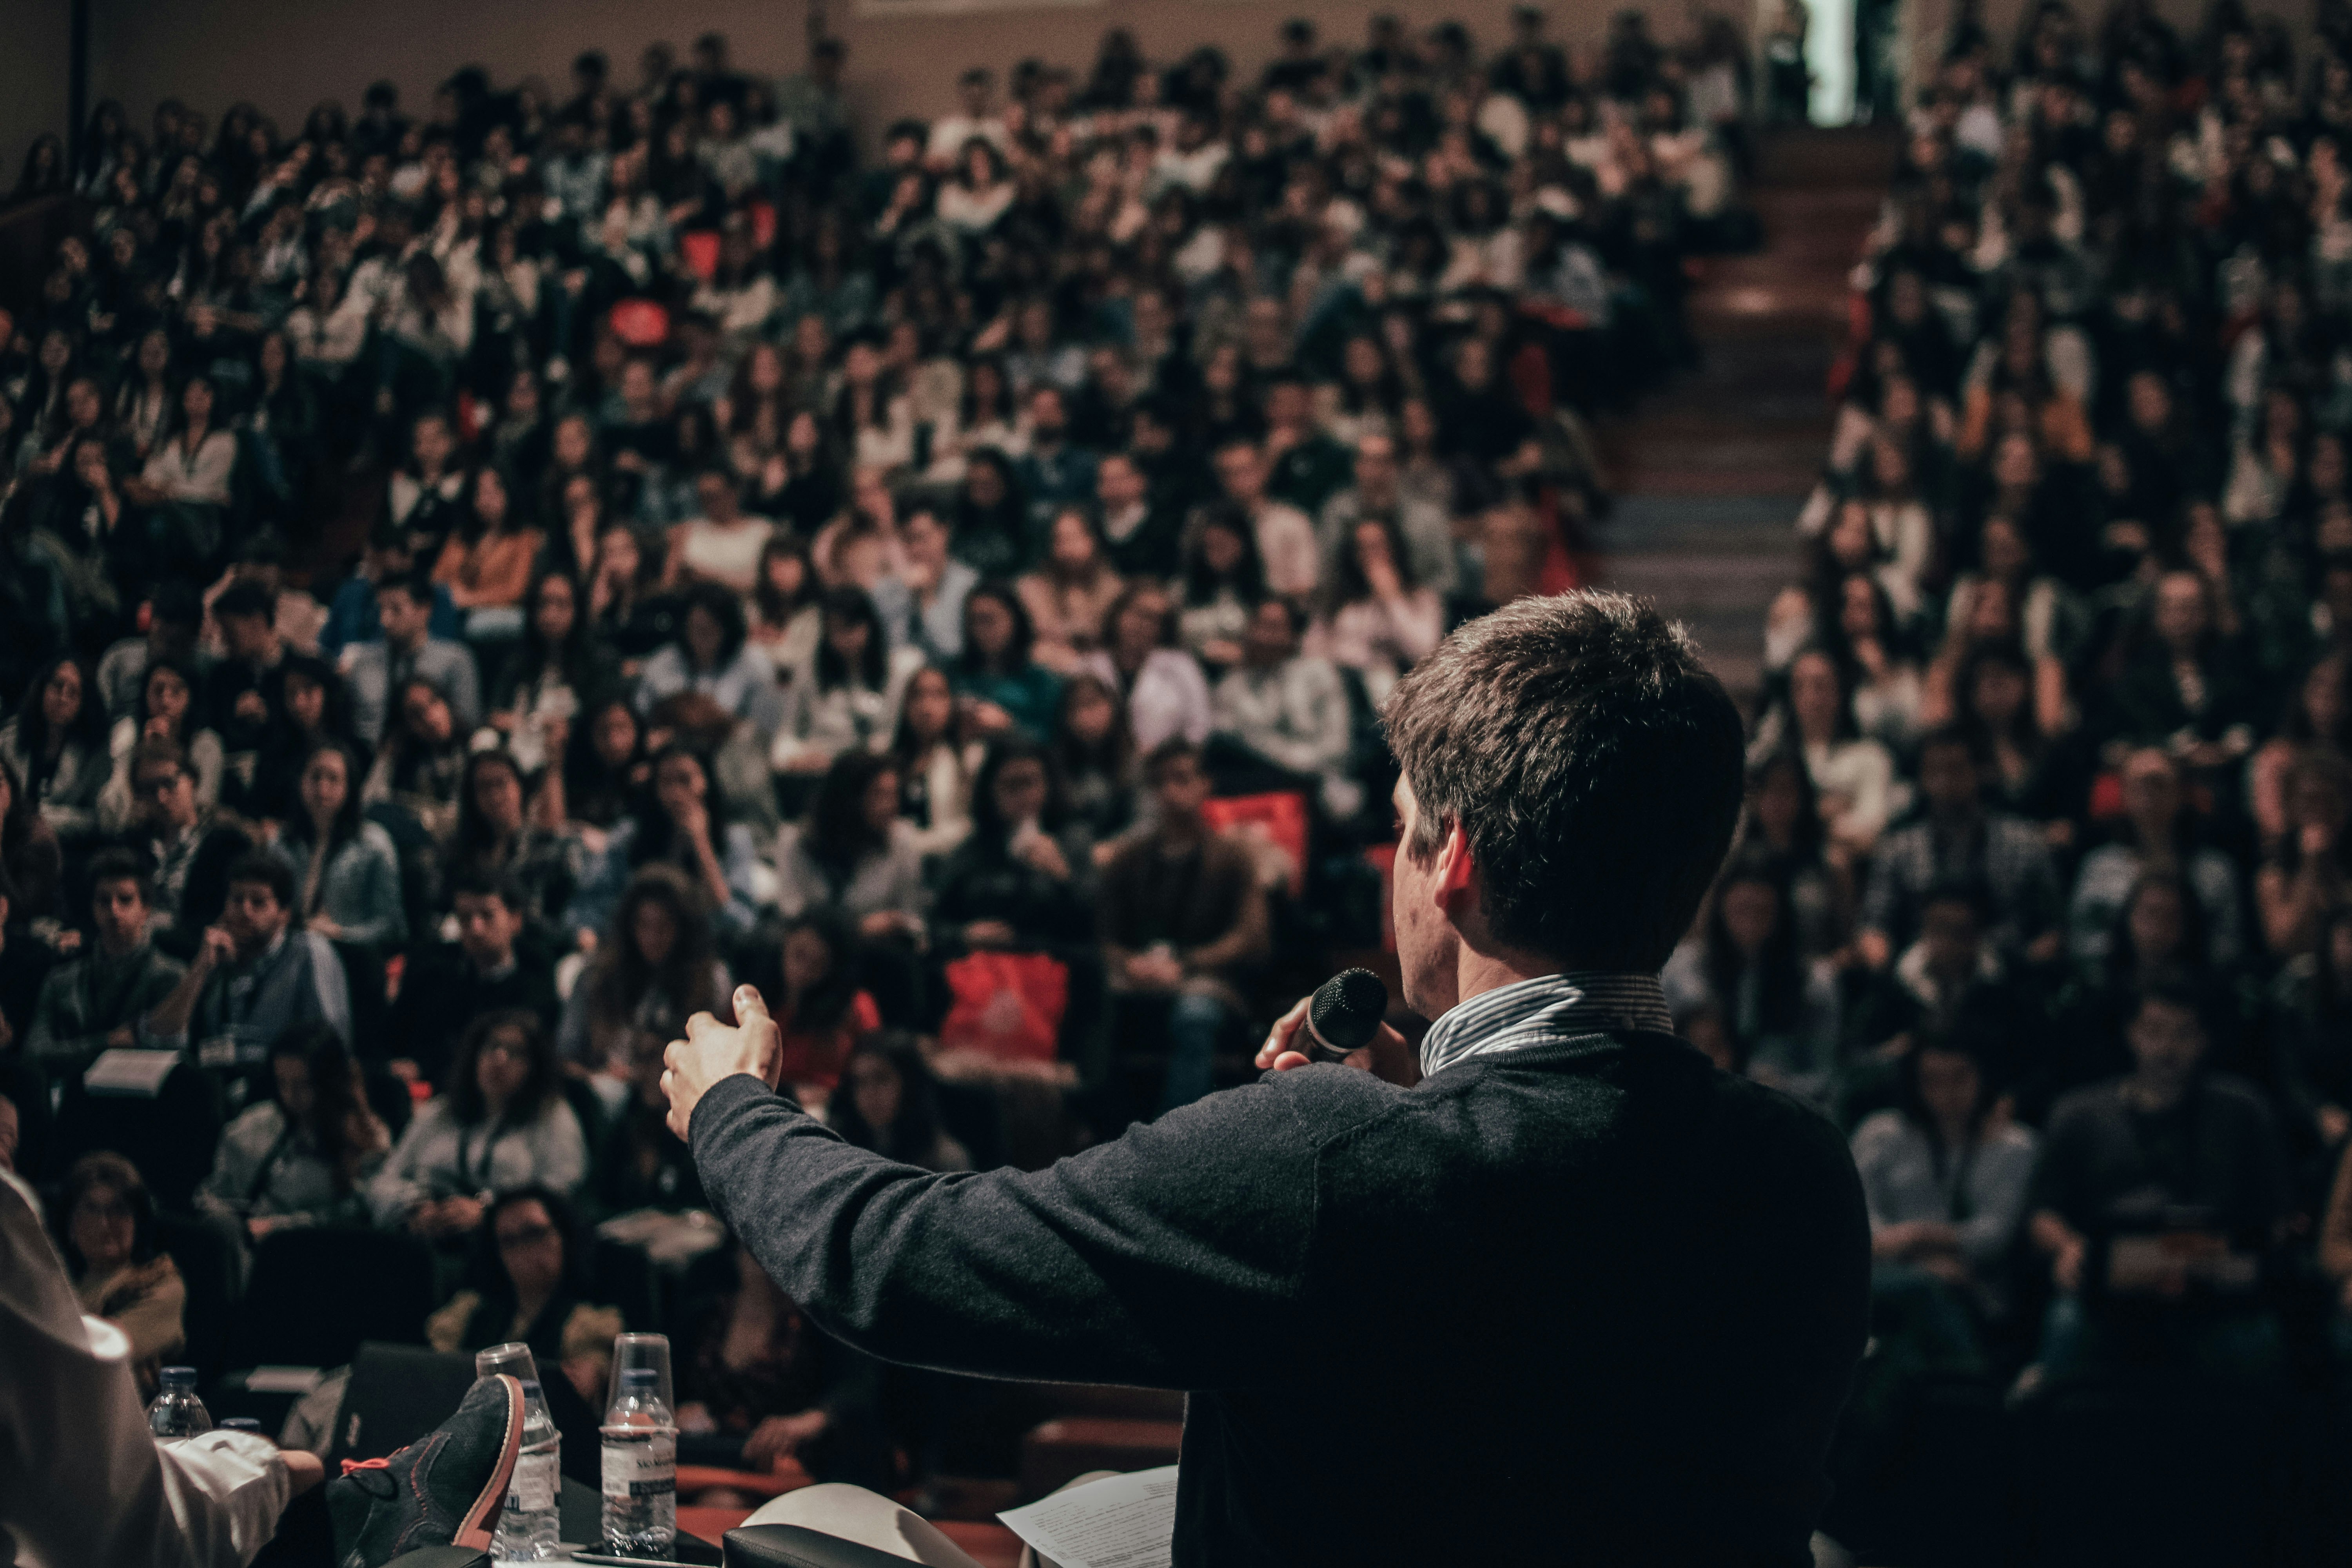 7 counterintuitive lessons I've learned about creating online and building an audience